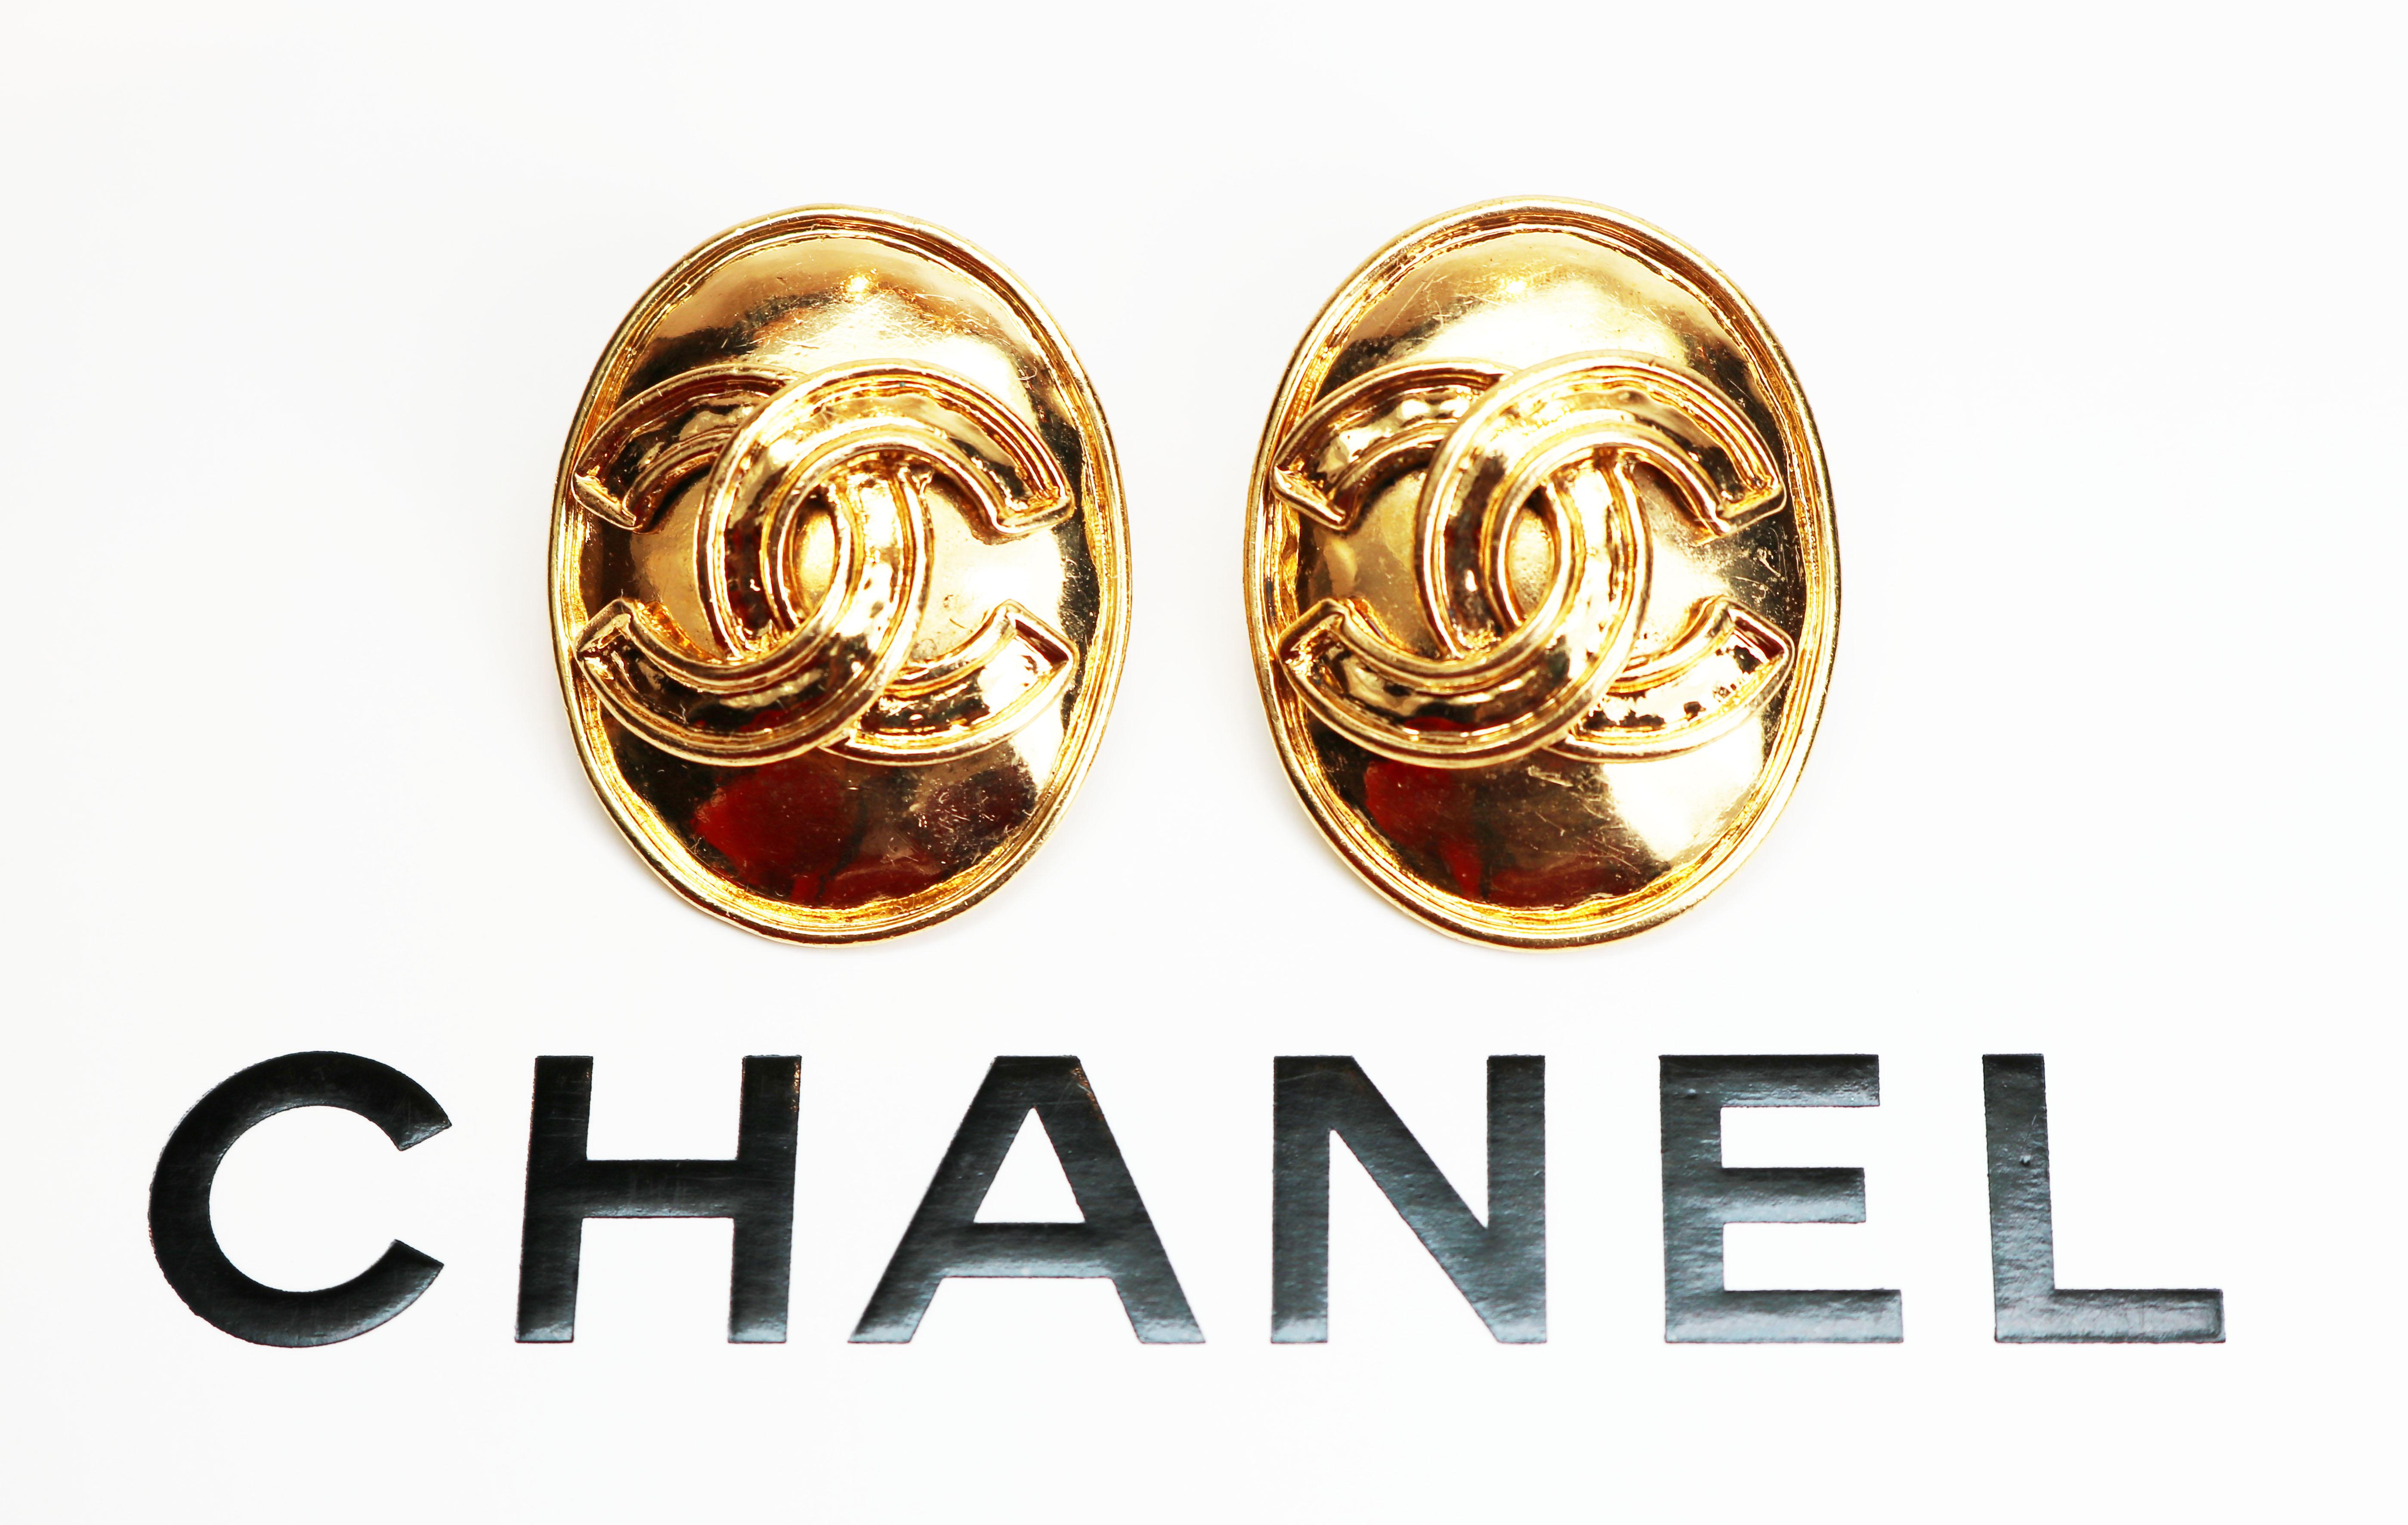 VINTAGE CHANEL Earrings *signed* Genuine Gold Oval Chanel CC Logo Medallion Clip-on French Designer Statement Earrings
These exceptional earrings measure 1.25